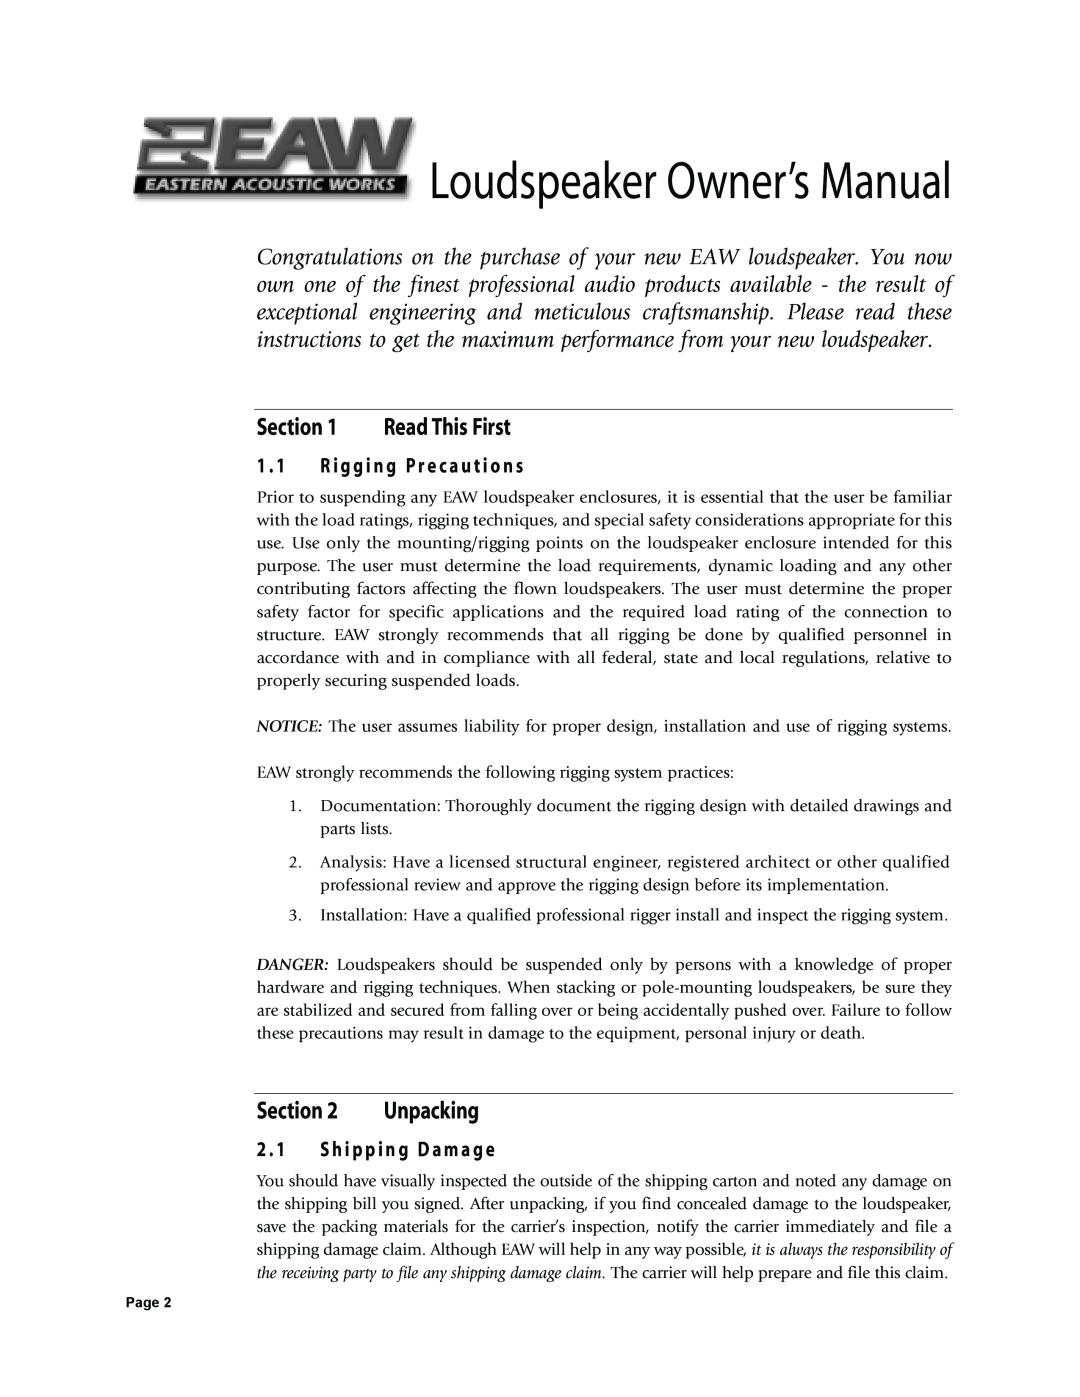 EAW 425017 owner manual Read This First, Section, 2 . 1 S h i p p i n g D a m a g e, Unpacking, Loudspeaker Owner’s Manual 